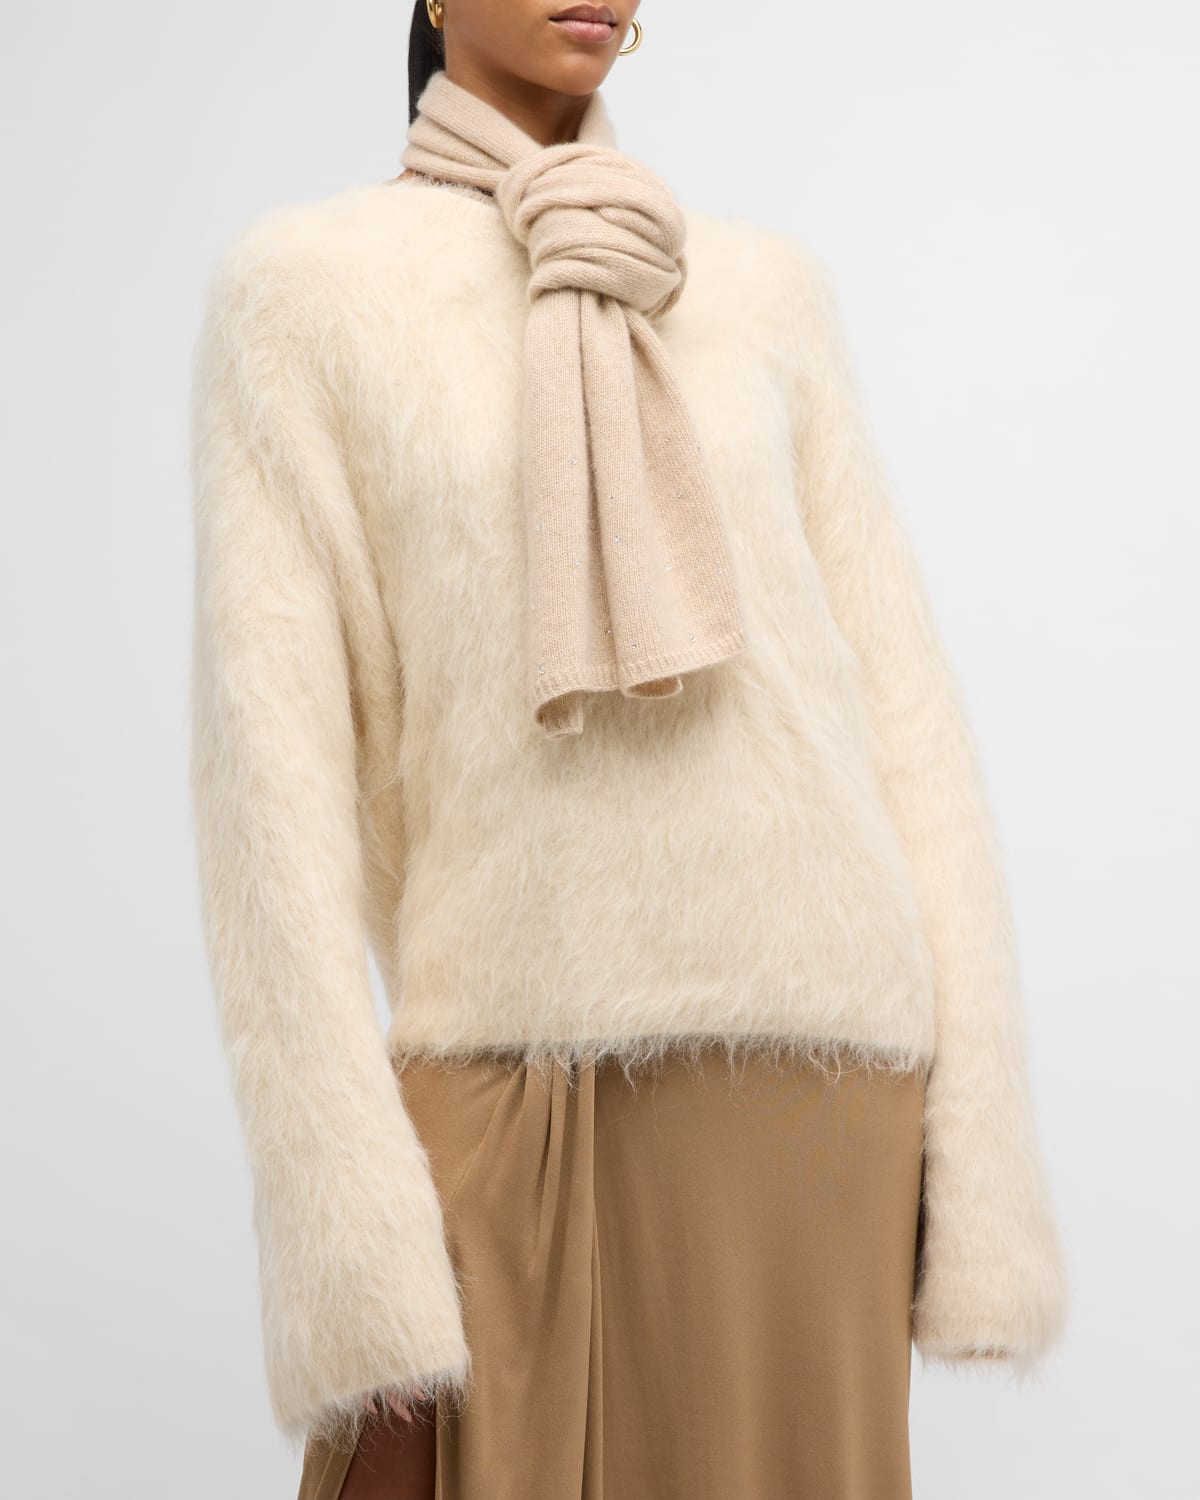 Scattered Crystal Cashmere Scarf